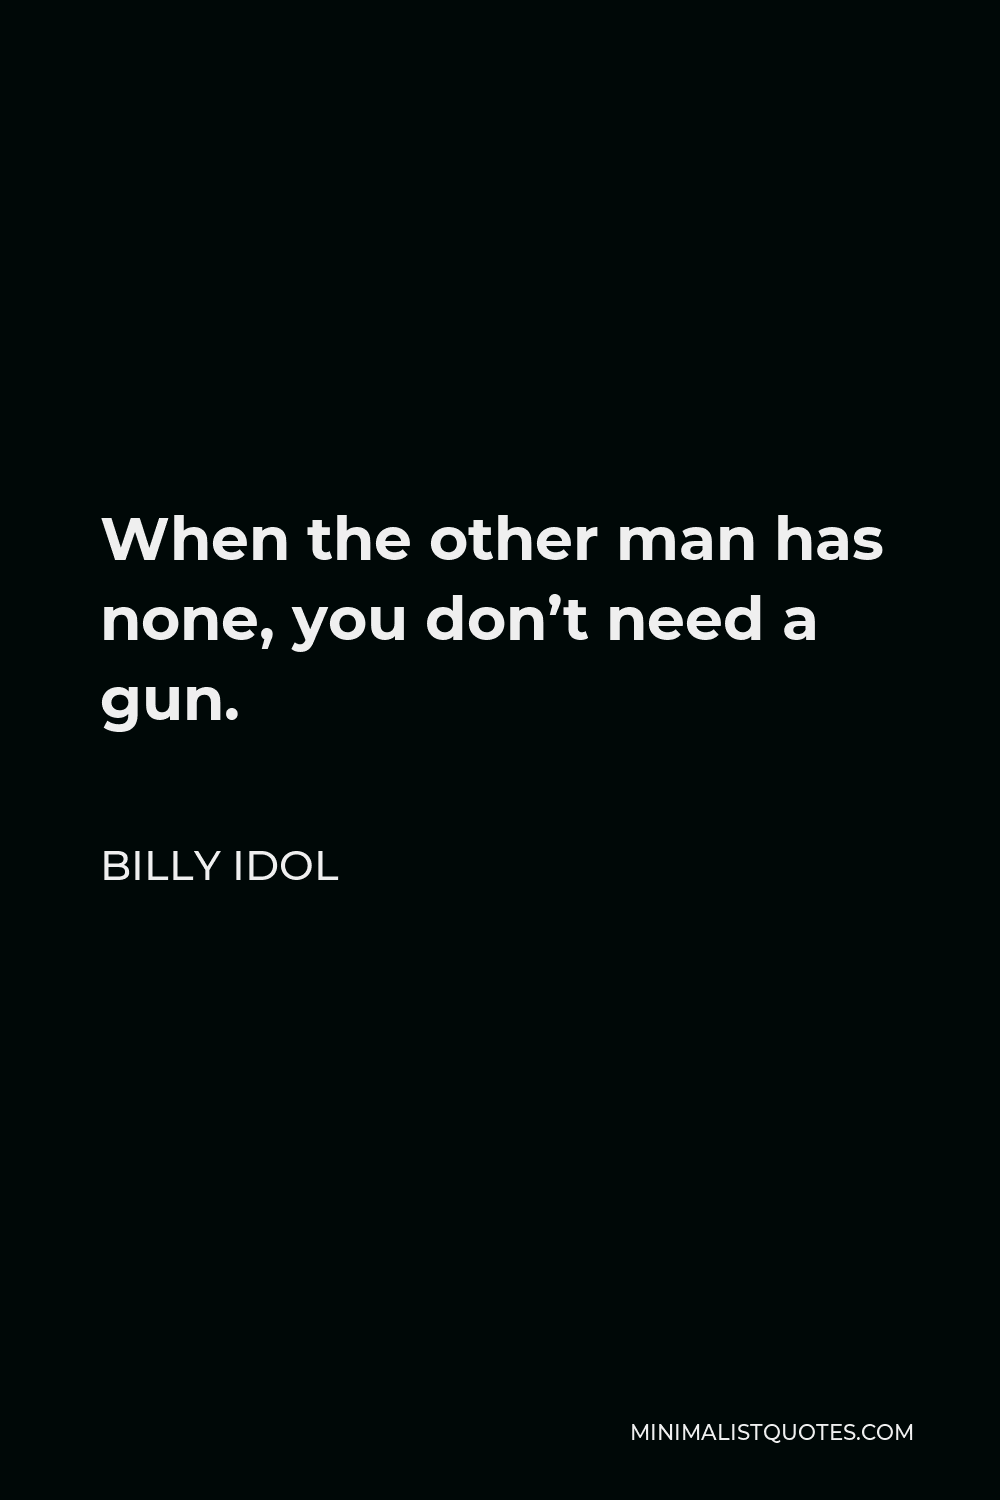 Billy Idol Quote - When the other man has none, you don’t need a gun.